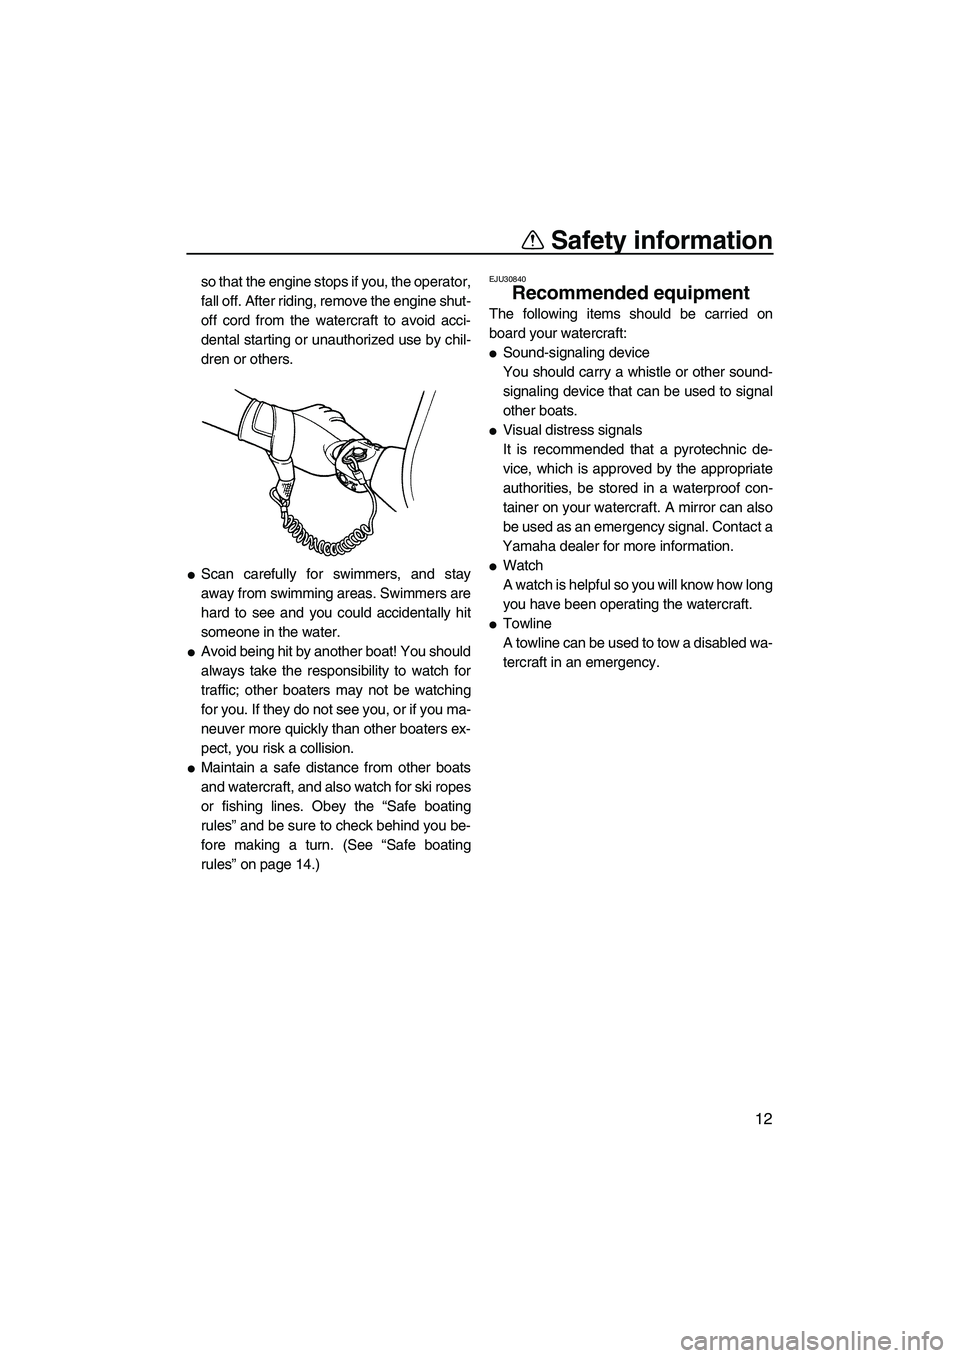 YAMAHA SUPERJET 2007 User Guide Safety information
12
so that the engine stops if you, the operator,
fall off. After riding, remove the engine shut-
off cord from the watercraft to avoid acci-
dental starting or unauthorized use by 